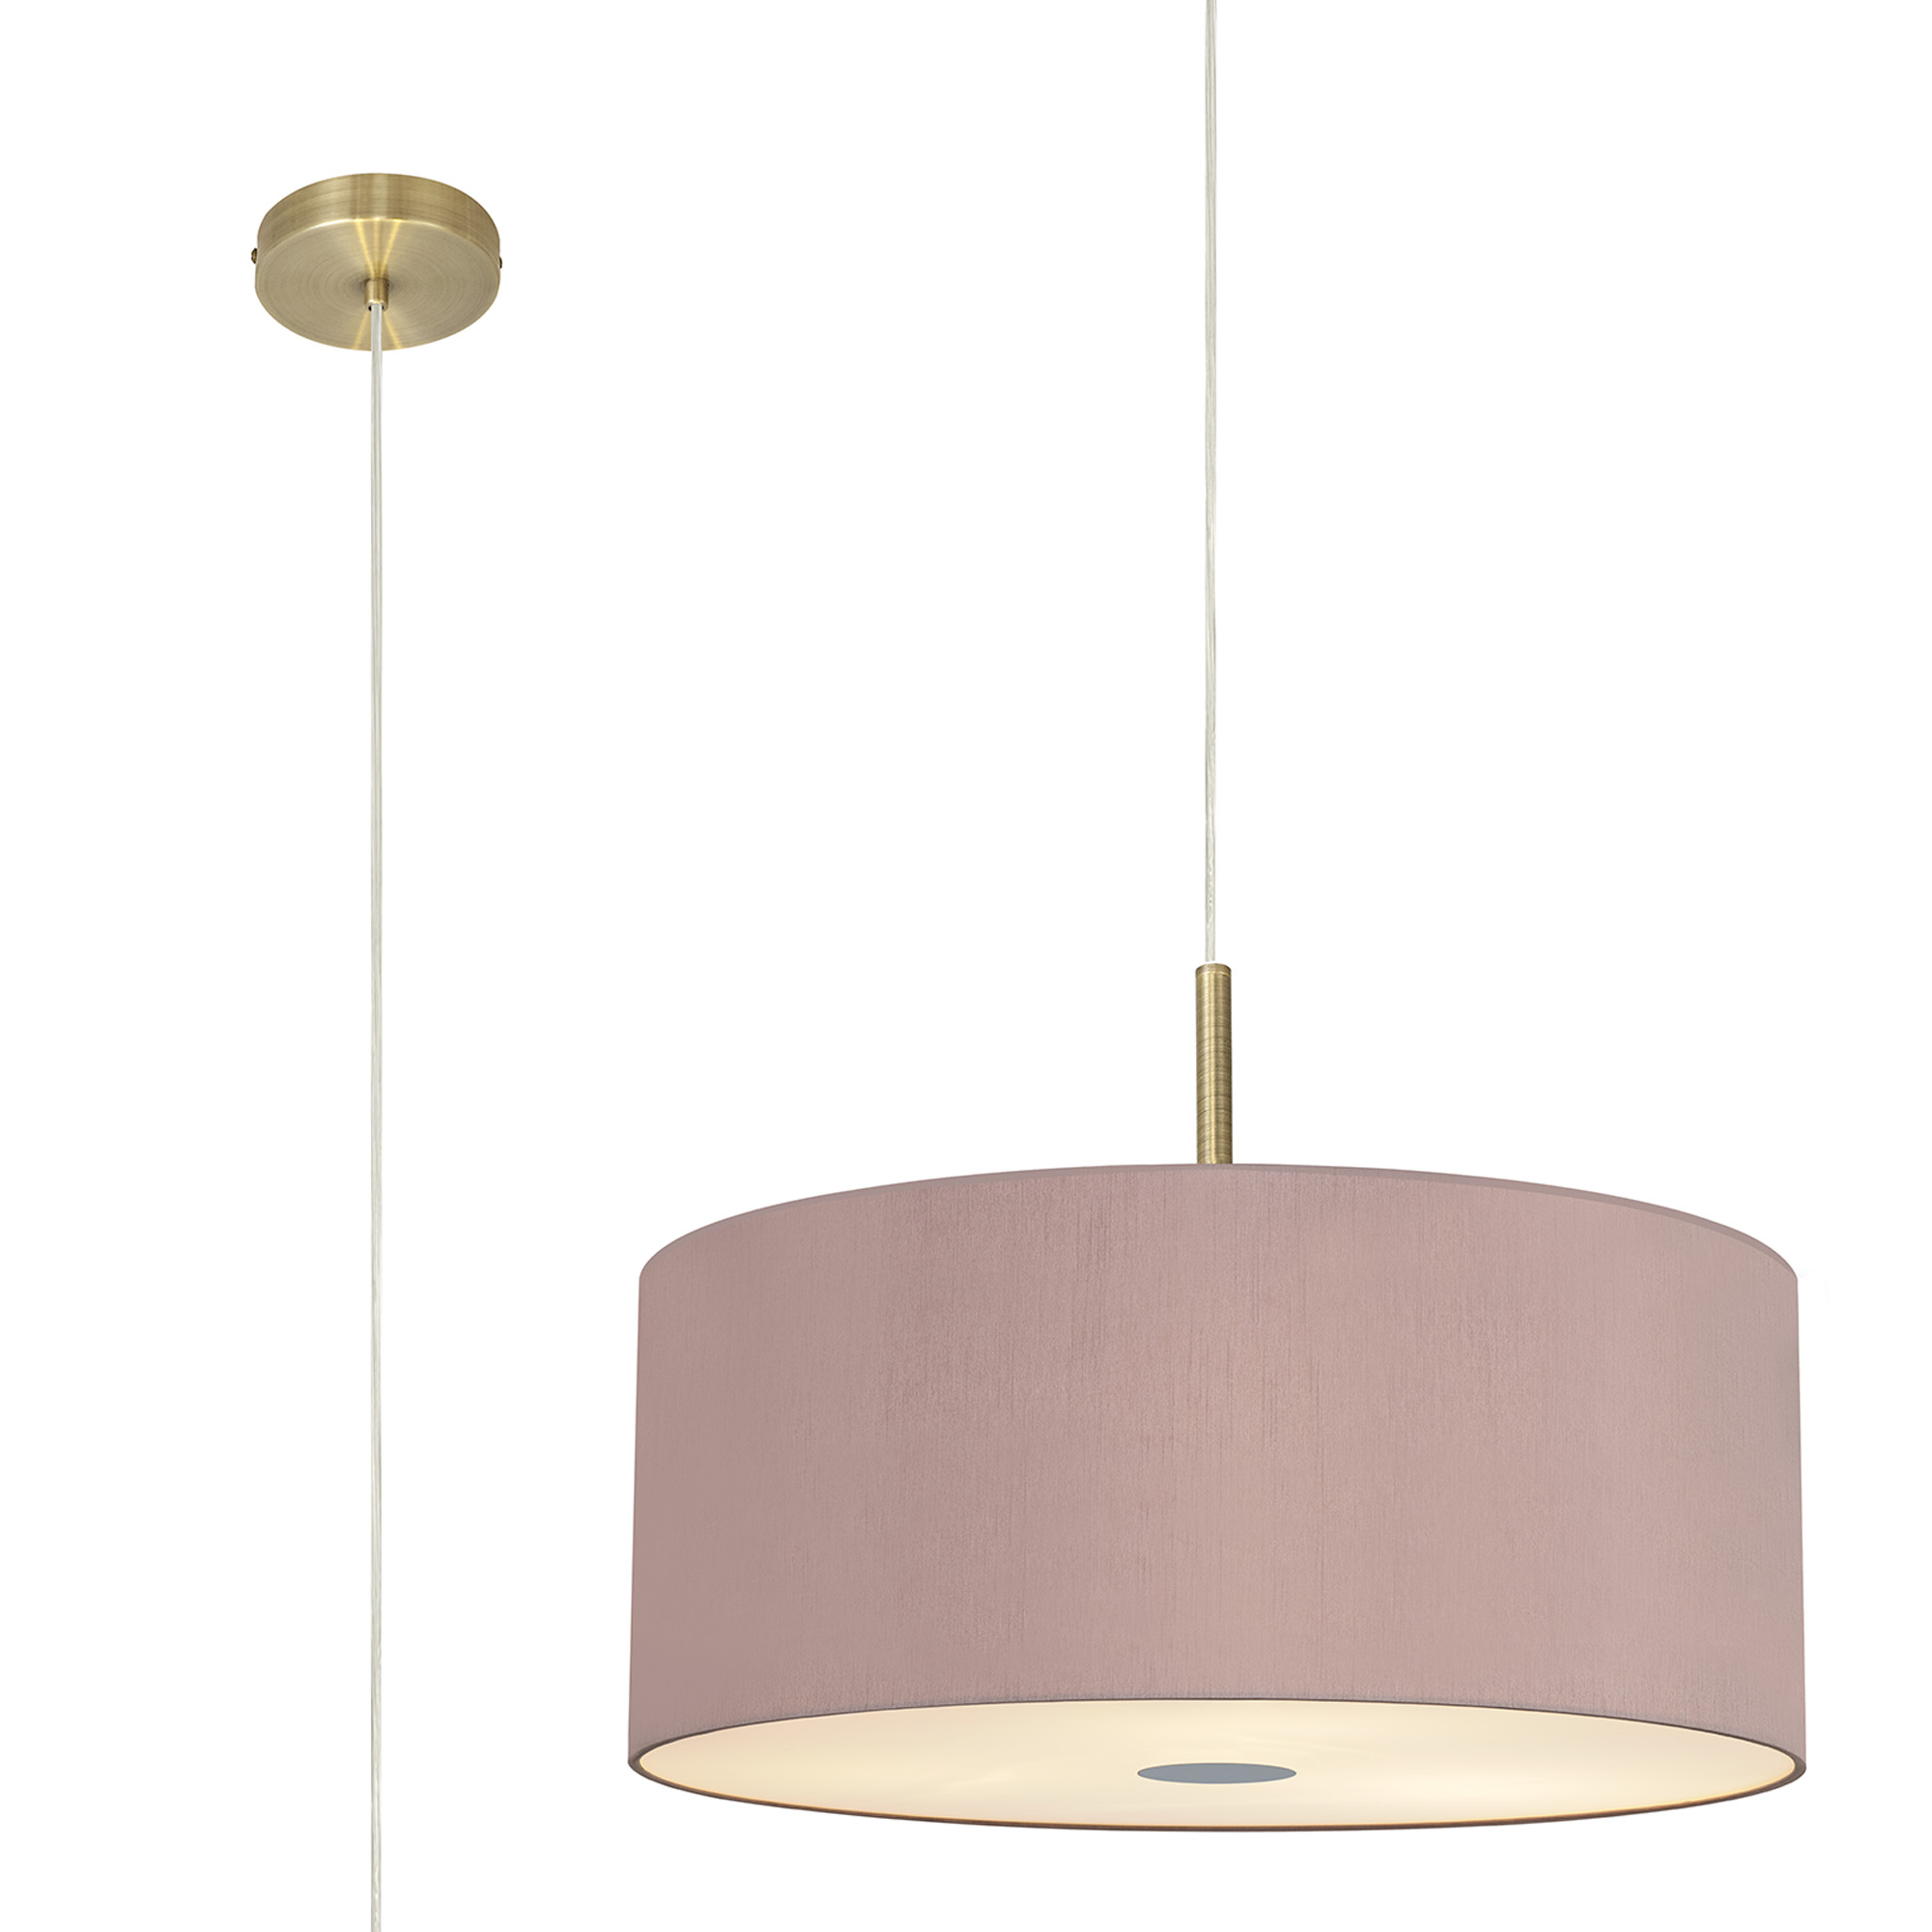 DK0519  Baymont 60cm 5 Light Pendant Antique Brass, Taupe/Halo Gold, Frosted Diffuser